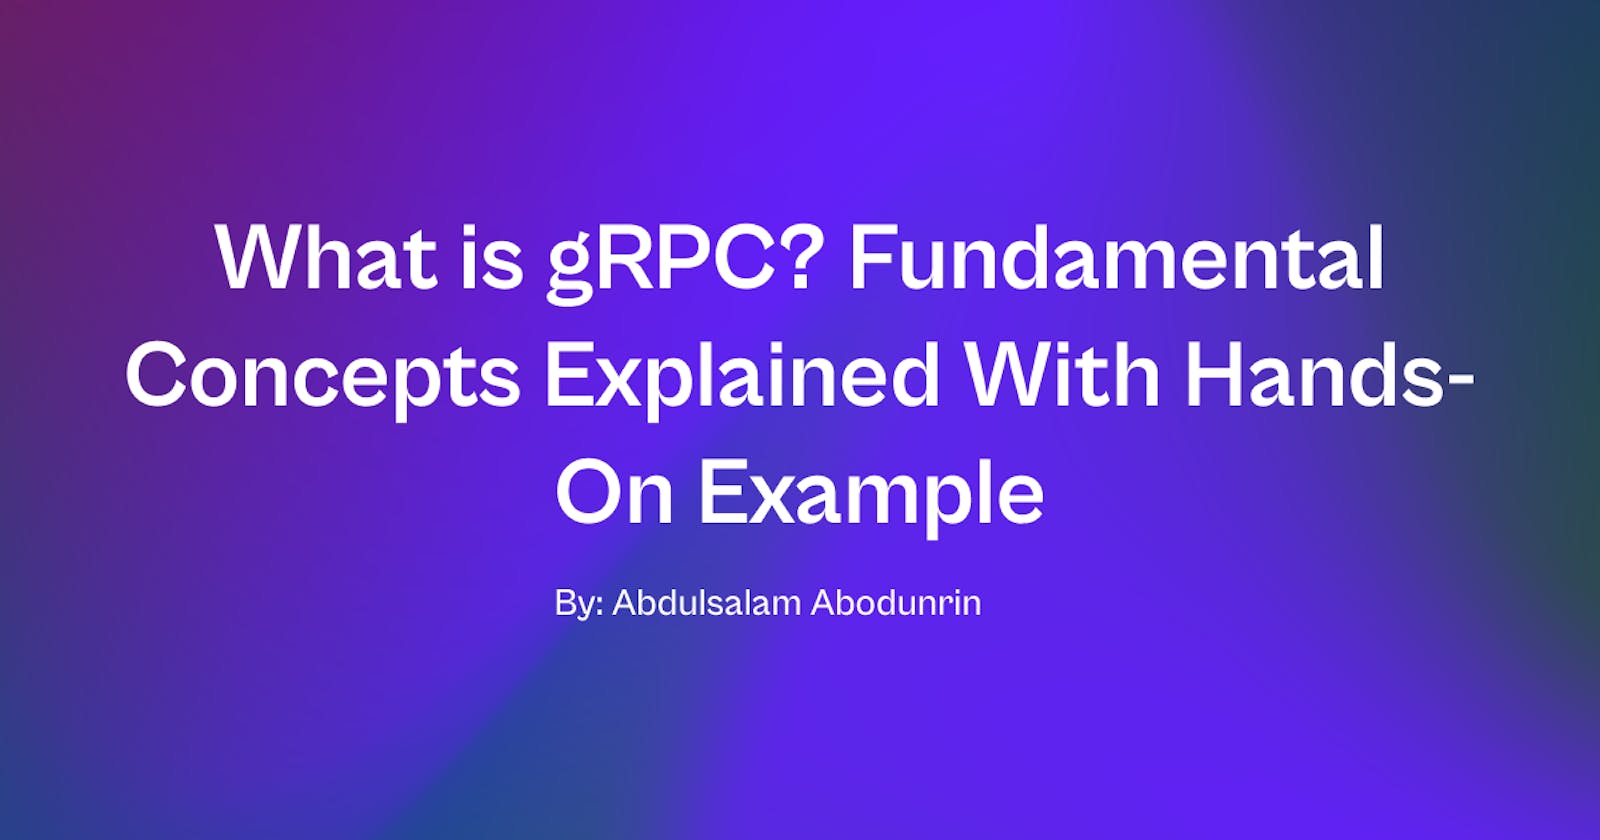 What is gRPC? Fundamental Concepts Explained With Hands-On Example